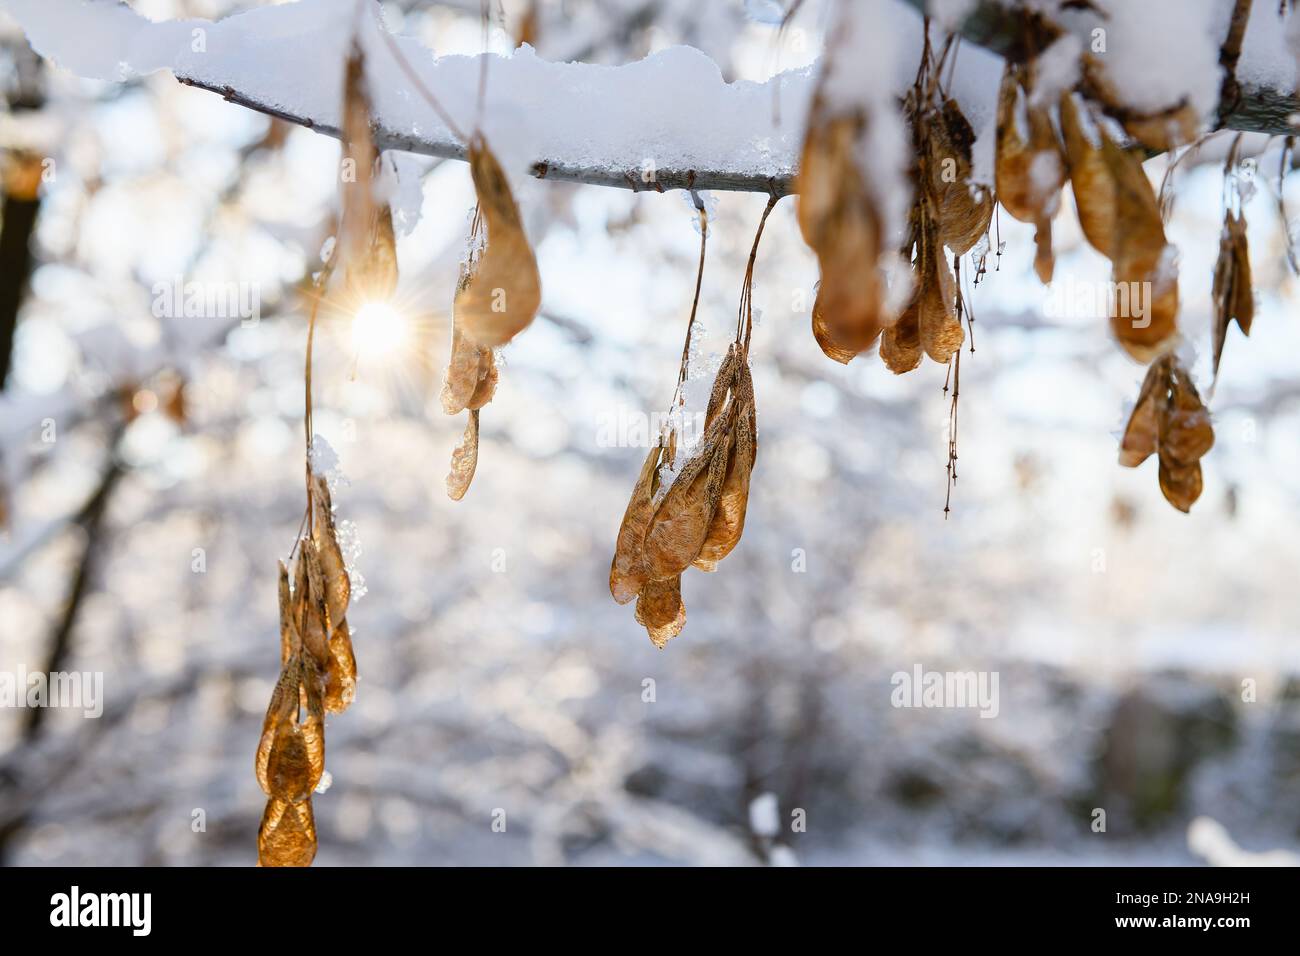 Planes or seeds of the American ash-leaved maple, covered with hoarfrost against the background of a tree trunk Stock Photo